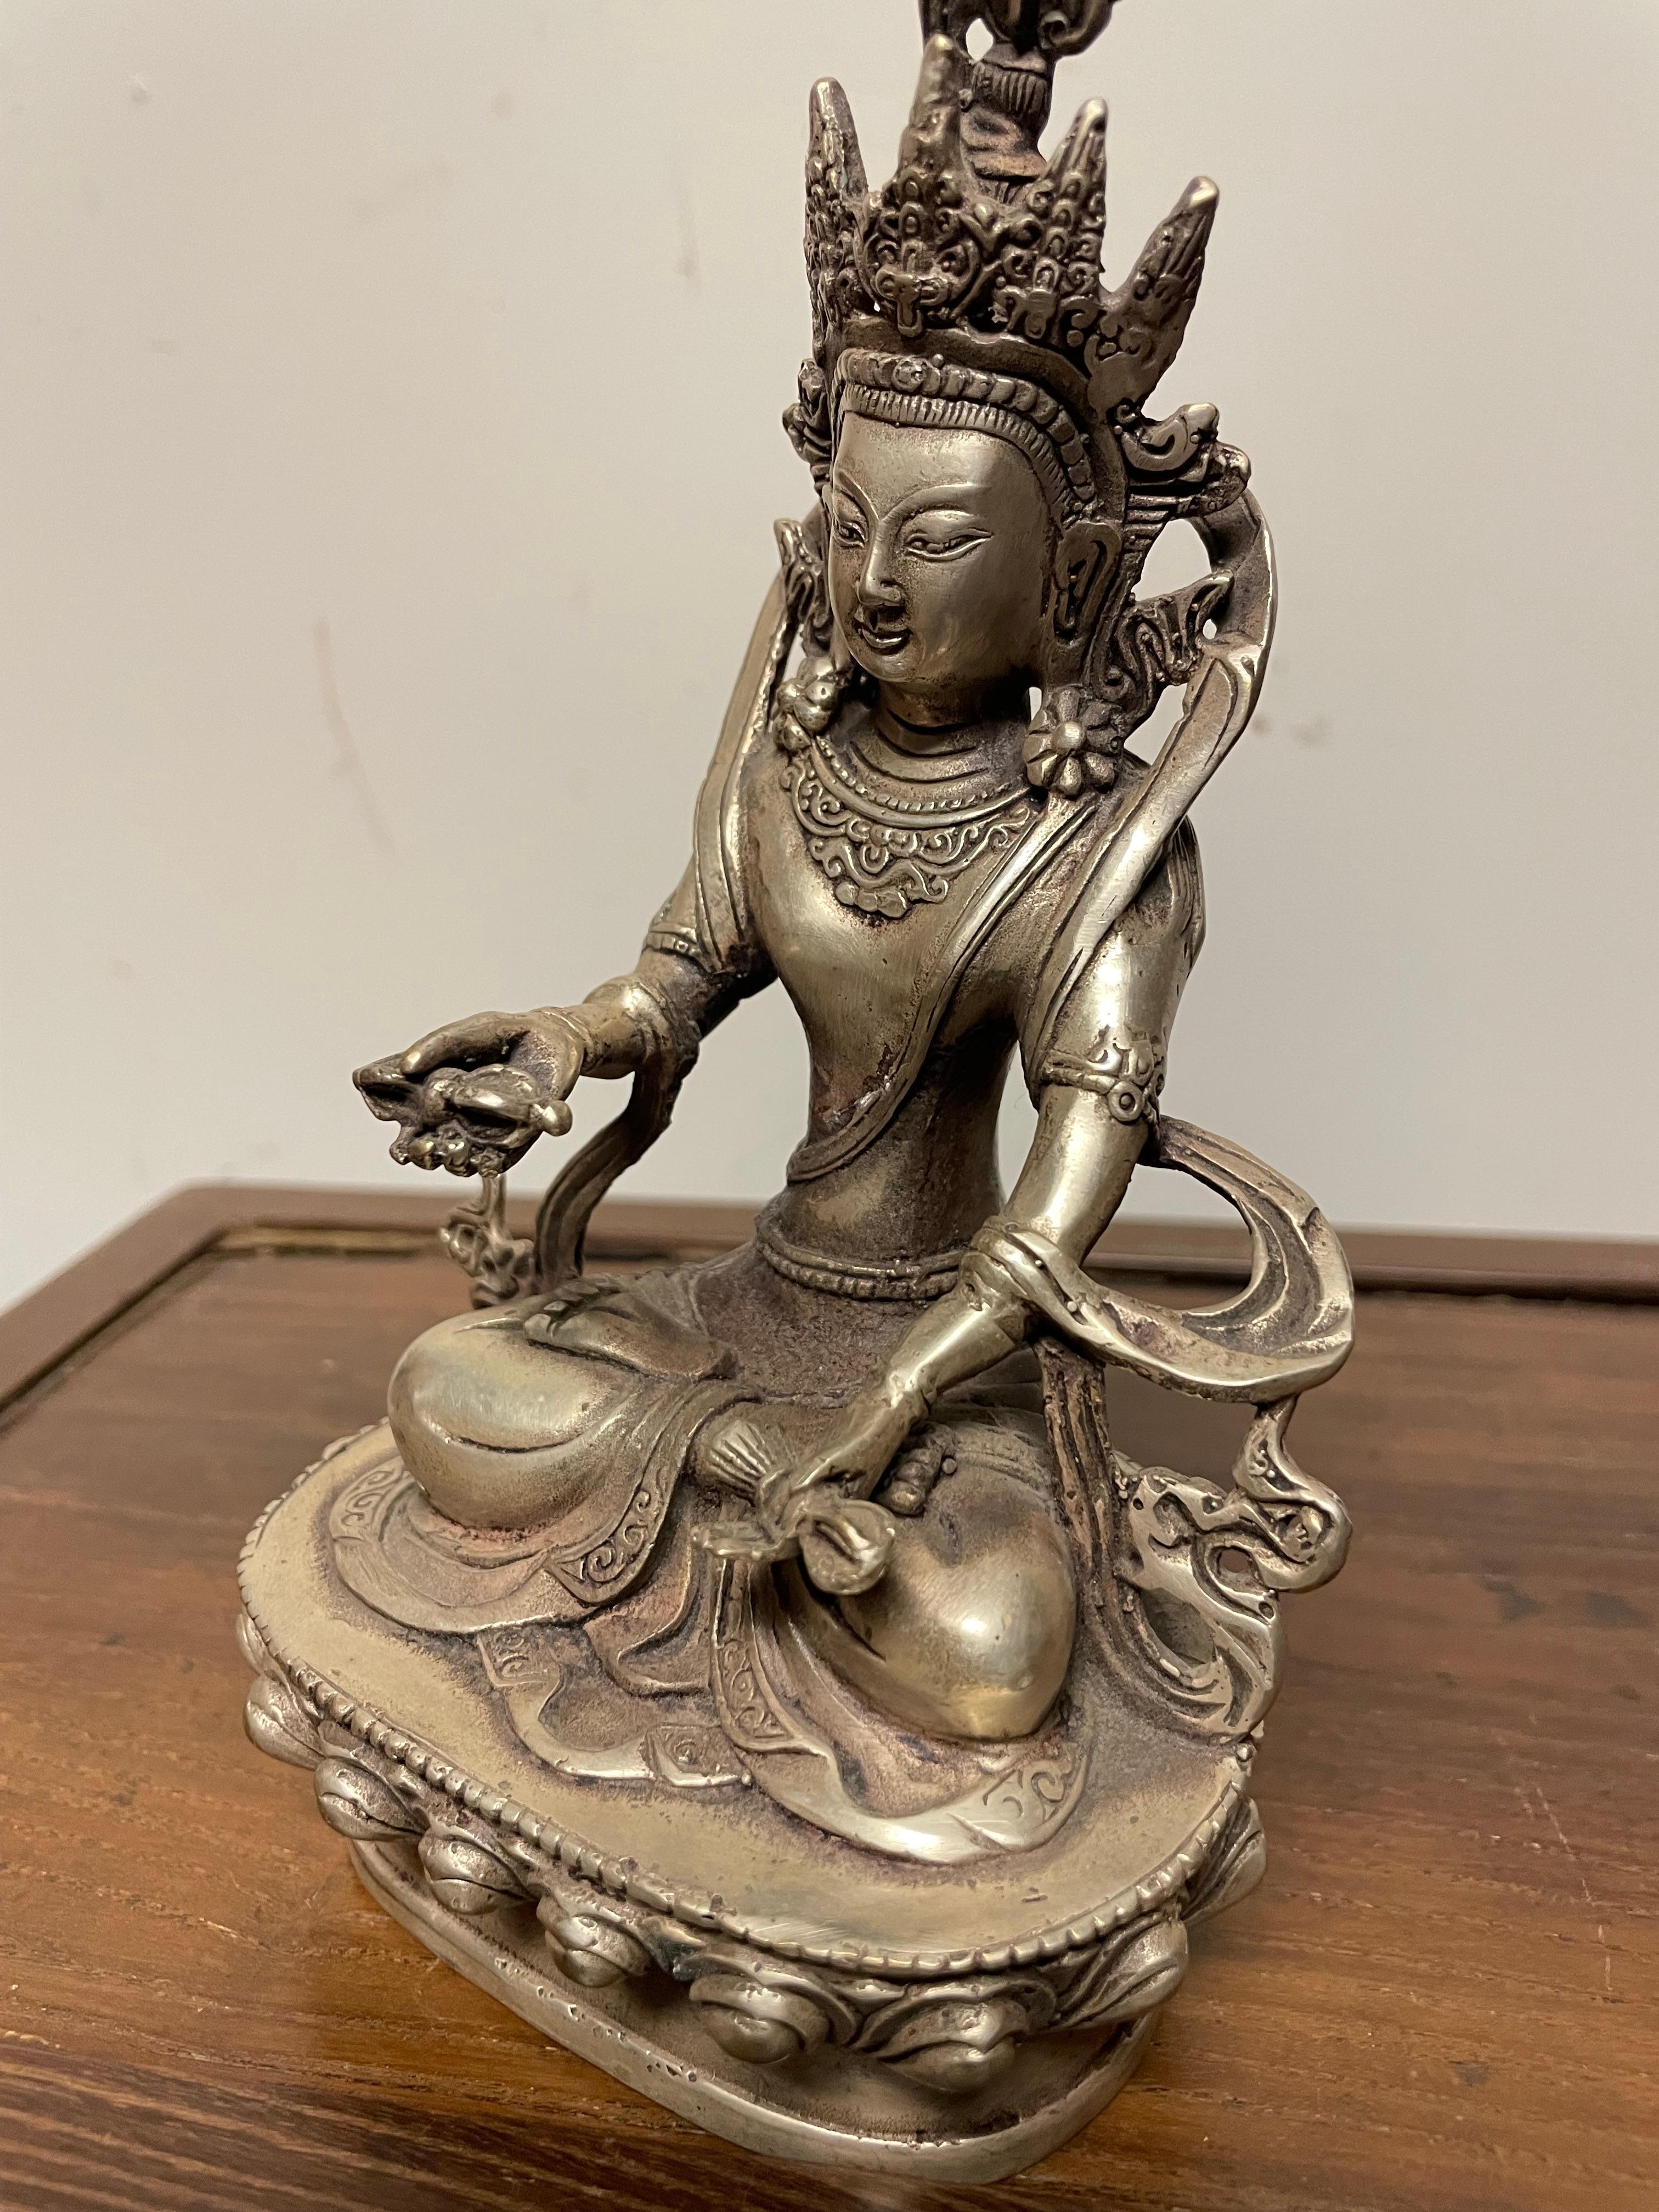 20th Century Indian Silvered Bronze Buddhist Deity Vajradhara Seated in Lotus Position For Sale